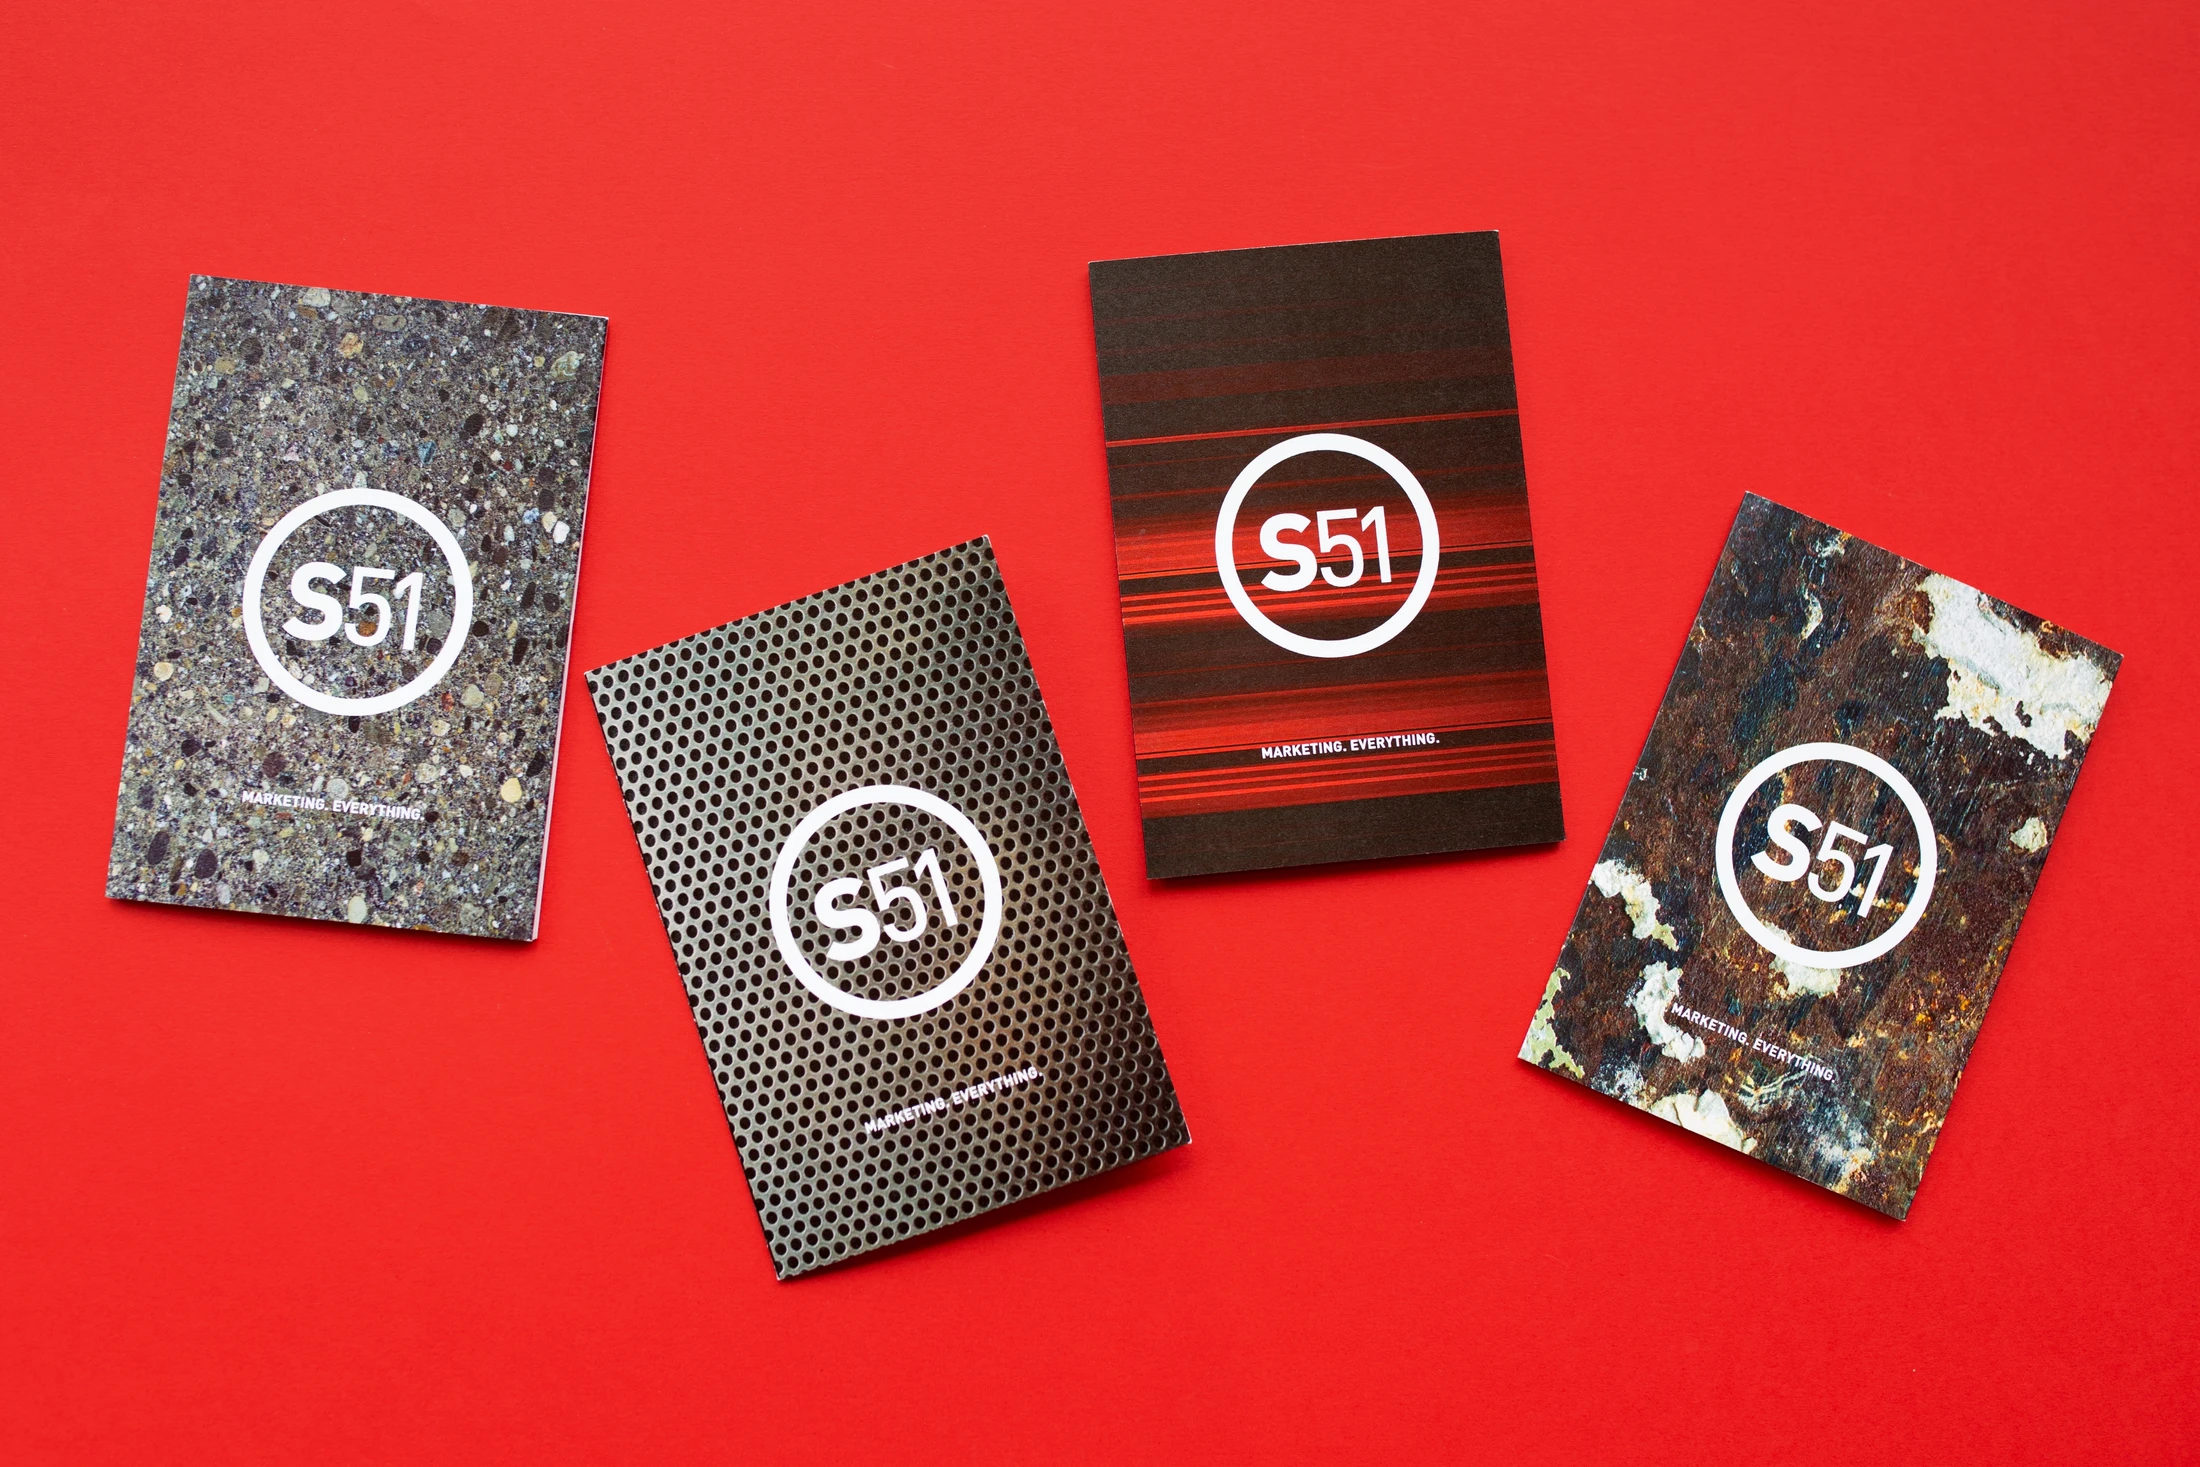 Four business cards on a red surface.